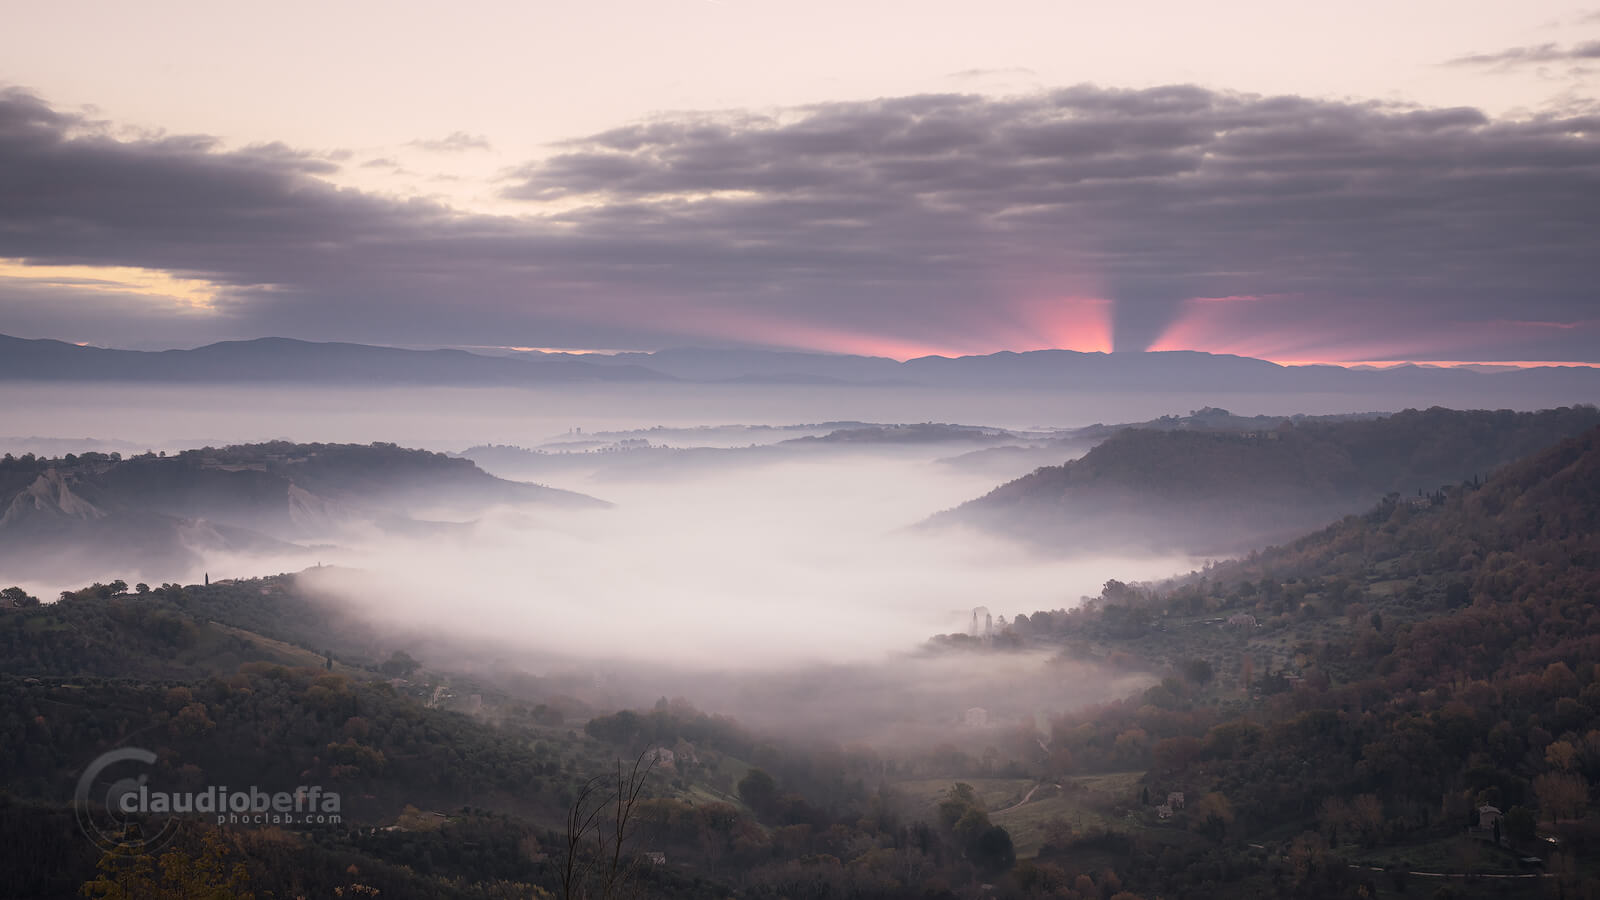 Sunrise, Fire and mist, Civita di Bagnoregio, Dying town, Italy, Mist, Fog, Valley, Badlands, Mountains, Forests, Town, Clouds, Light, Rays